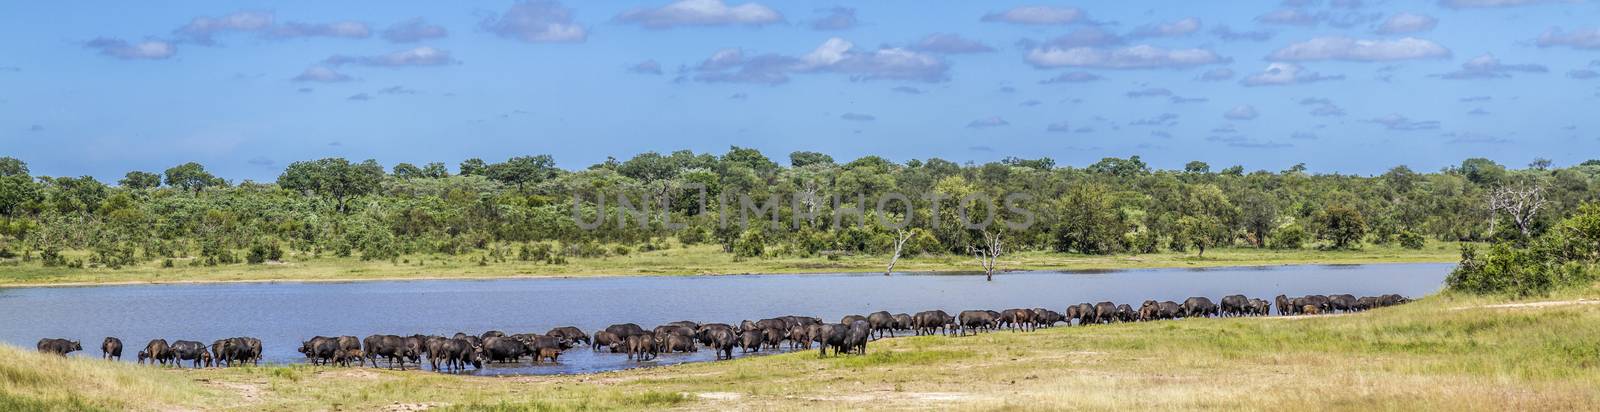 Herd of African buffalo in lake side in Kruger National park, South Africa ; Specie Syncerus caffer family of Bovidae